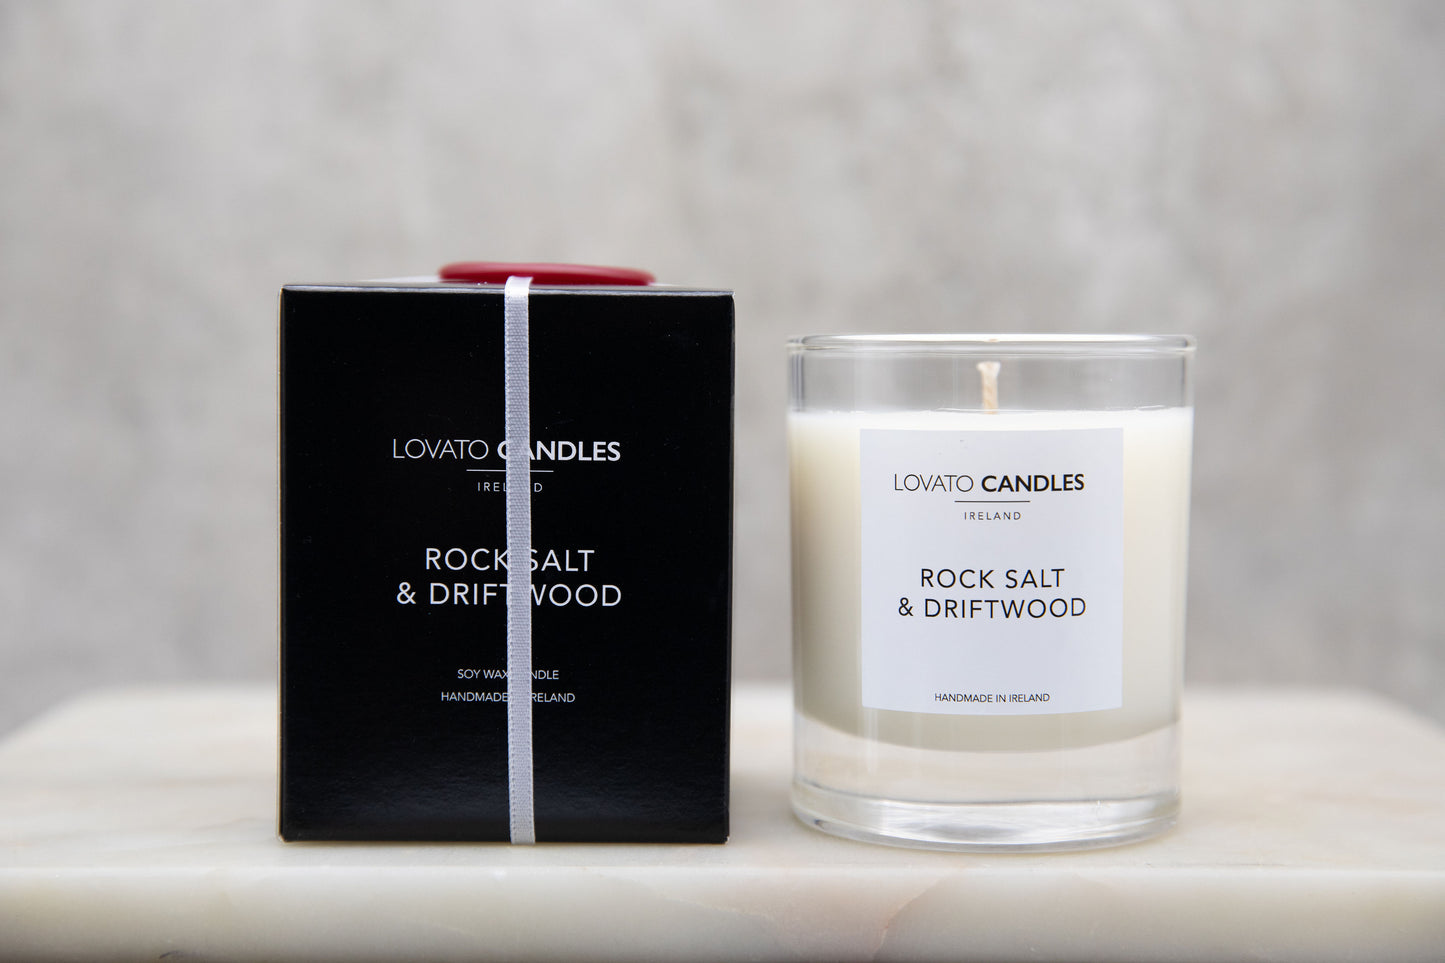 Clear Scented Candle with Luxury Black Box - Rock Salt & Driftwood